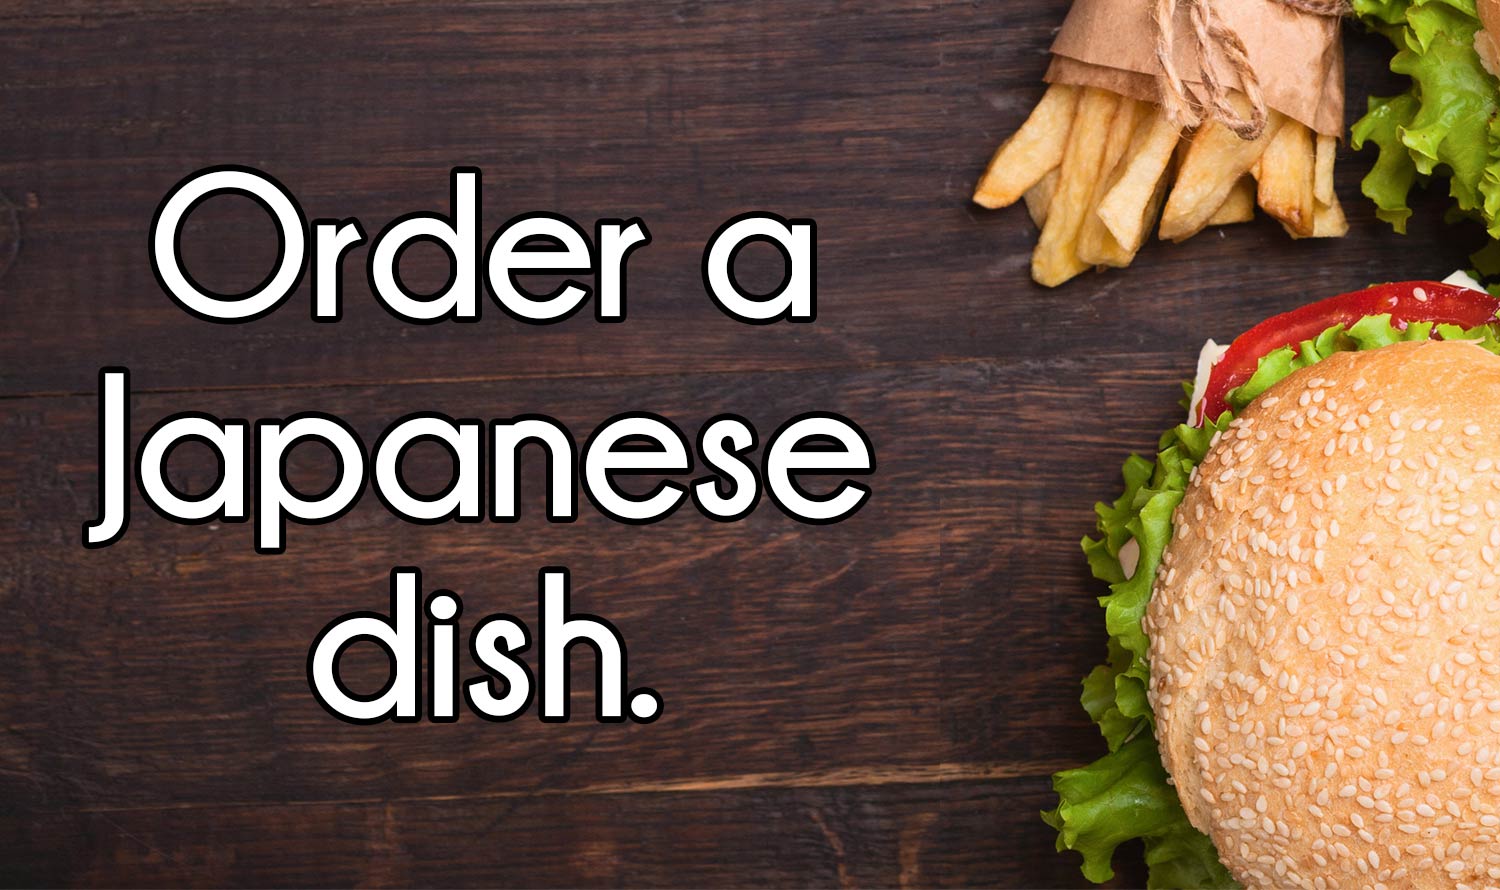 Order Some Meals from Around the World and We’ll Reveal What Makes You Happy! 🥐🍔🌮🥘🍣 Q712